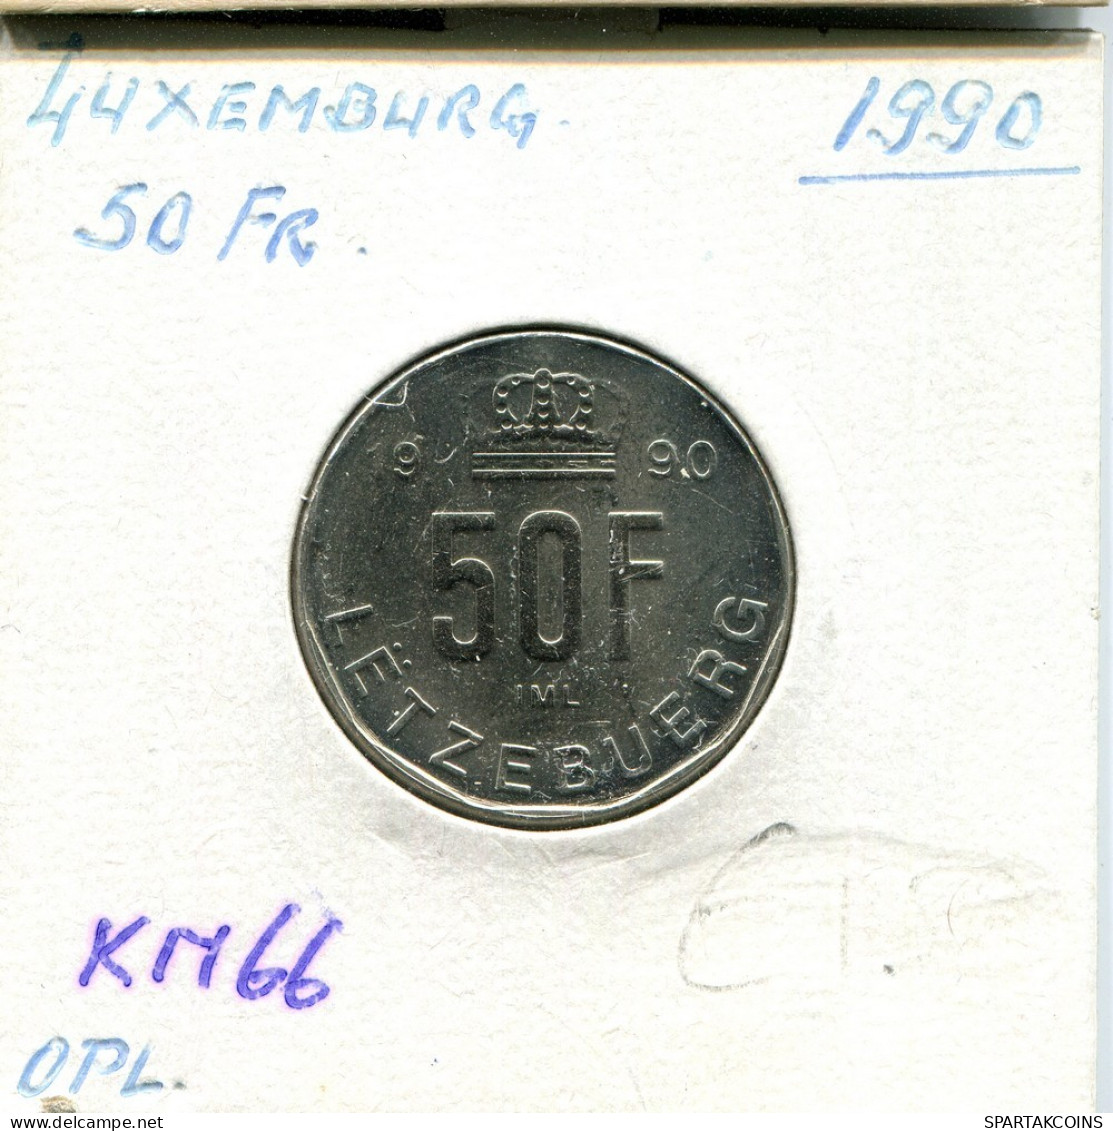 50 FRANCS 1990 LUXEMBURG LUXEMBOURG Münze #AT253.D.A - Lussemburgo